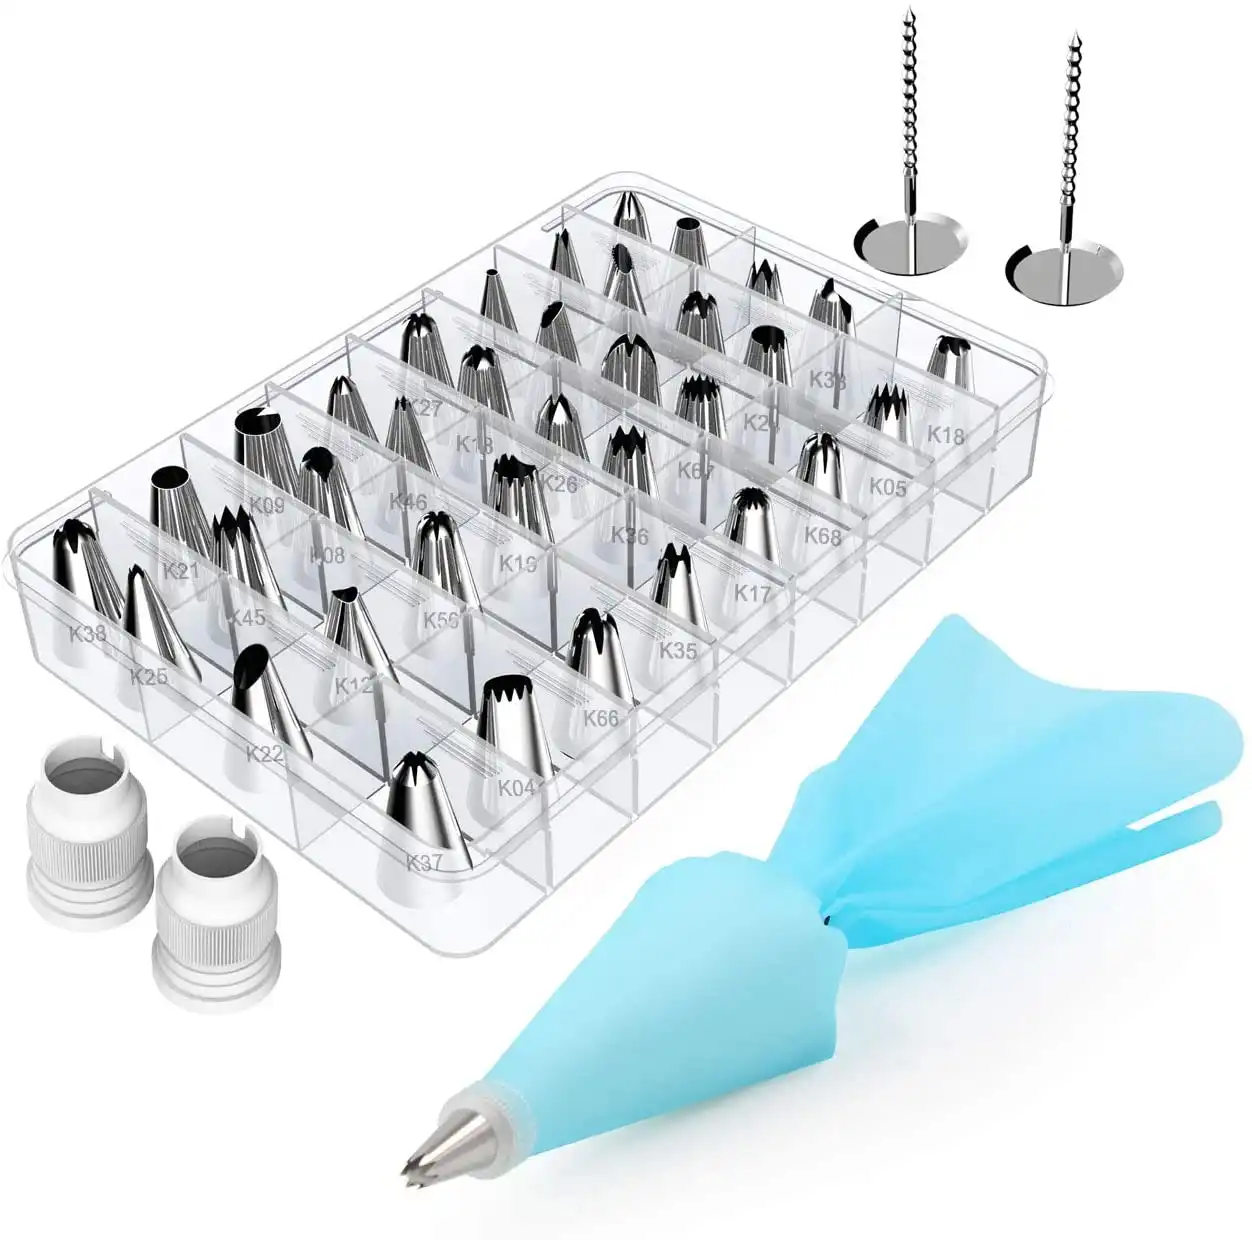 DUMO 42Pcs Cake Tools Stainless Steel Icing Pipe Nozzle Silicone Pastry Bag Piping Cake Decorating Supplies Kitchen Accessories